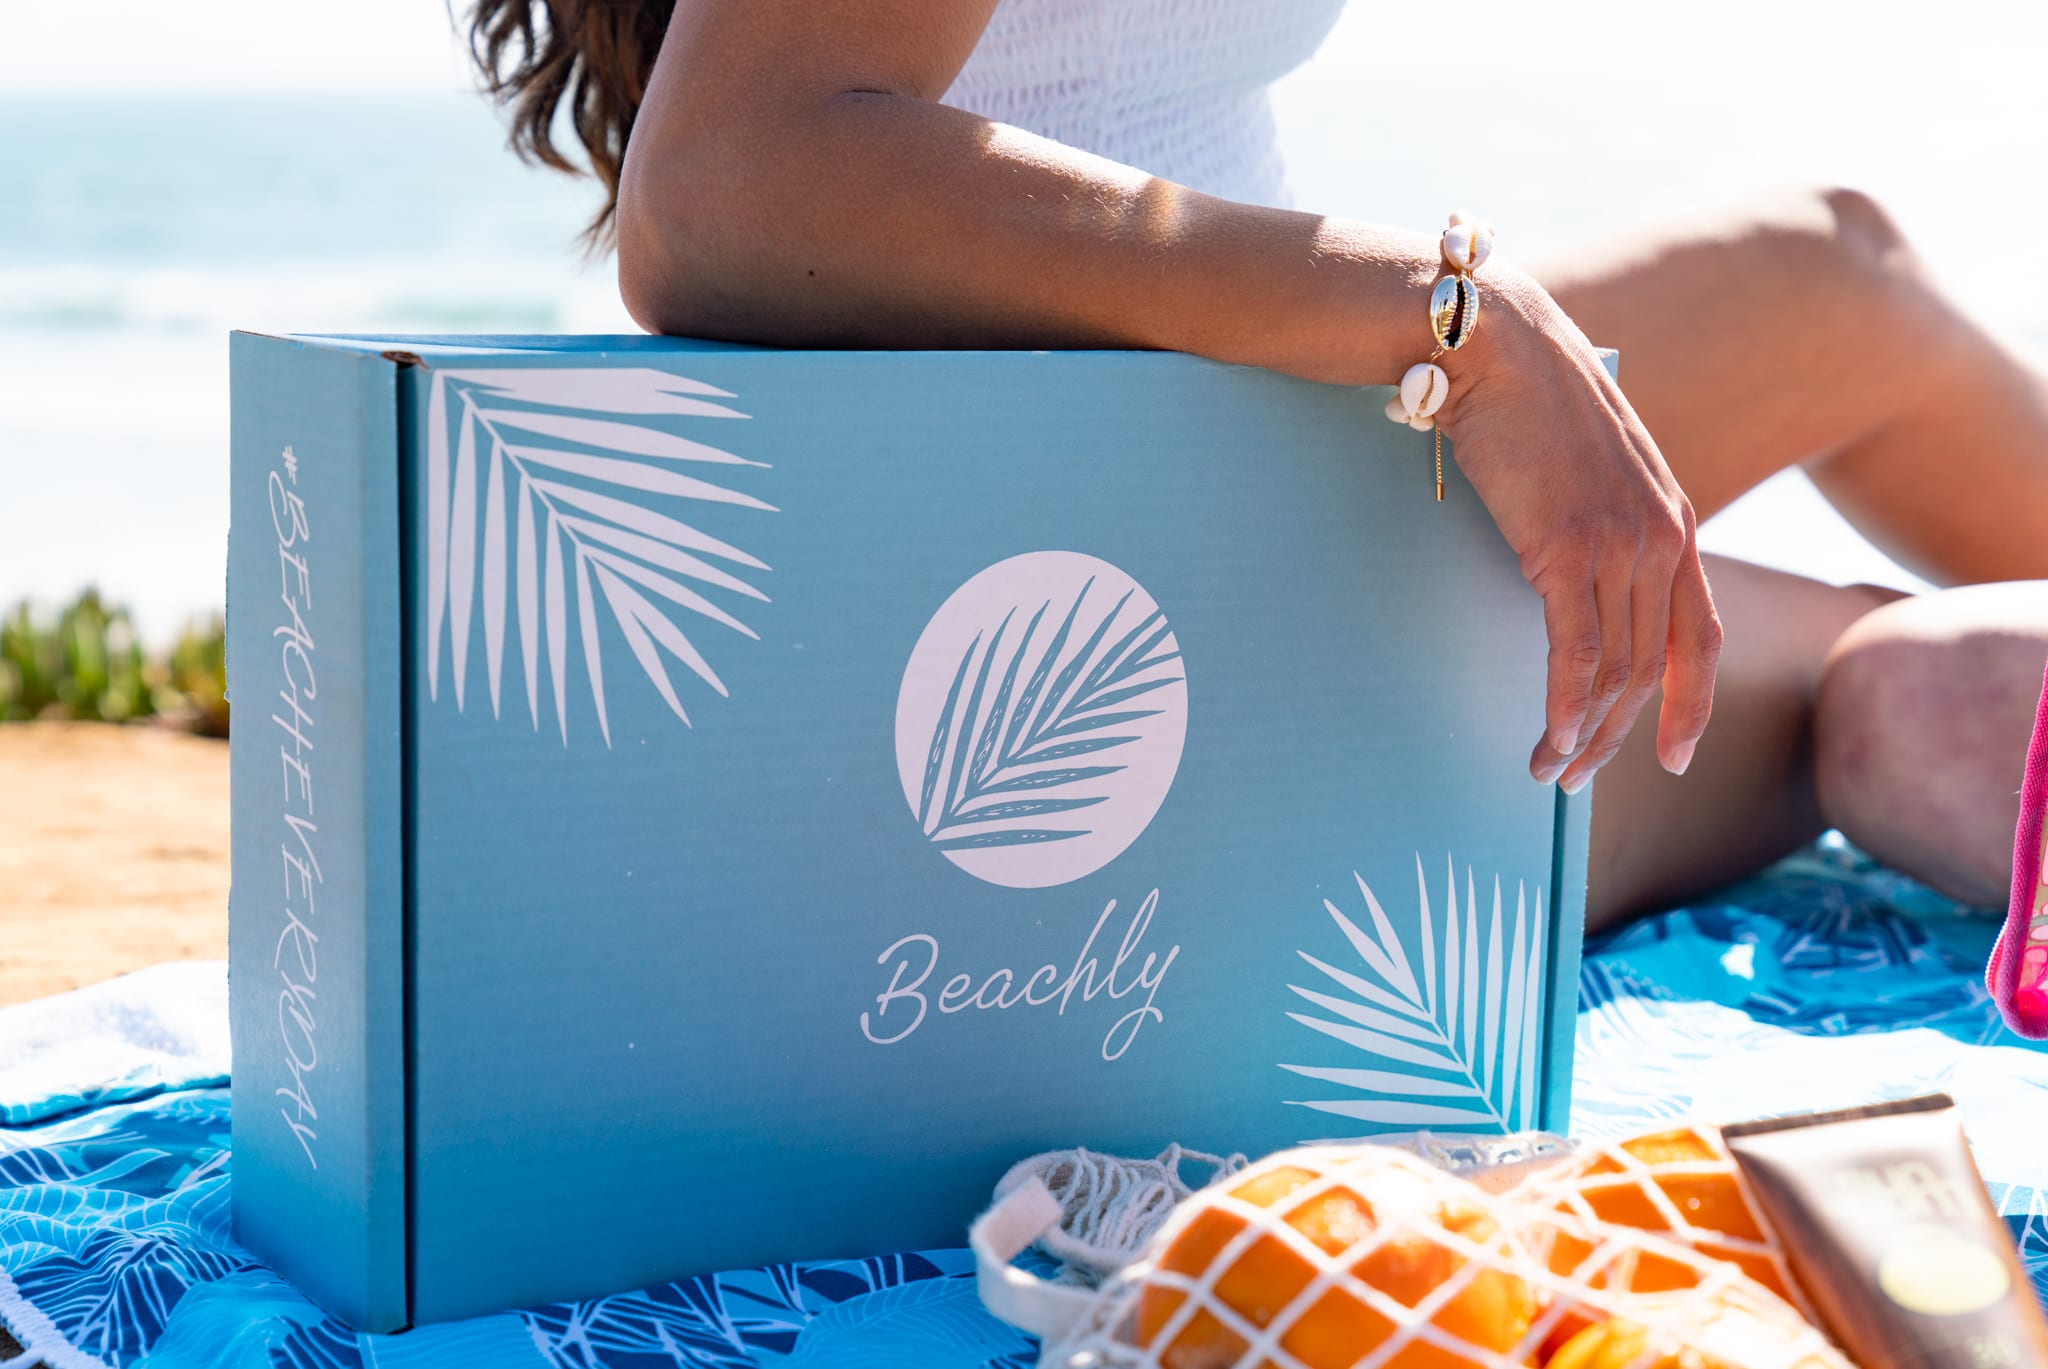 Beachly Coupons: Save $30 OFF or Get a FREE Bonus Box